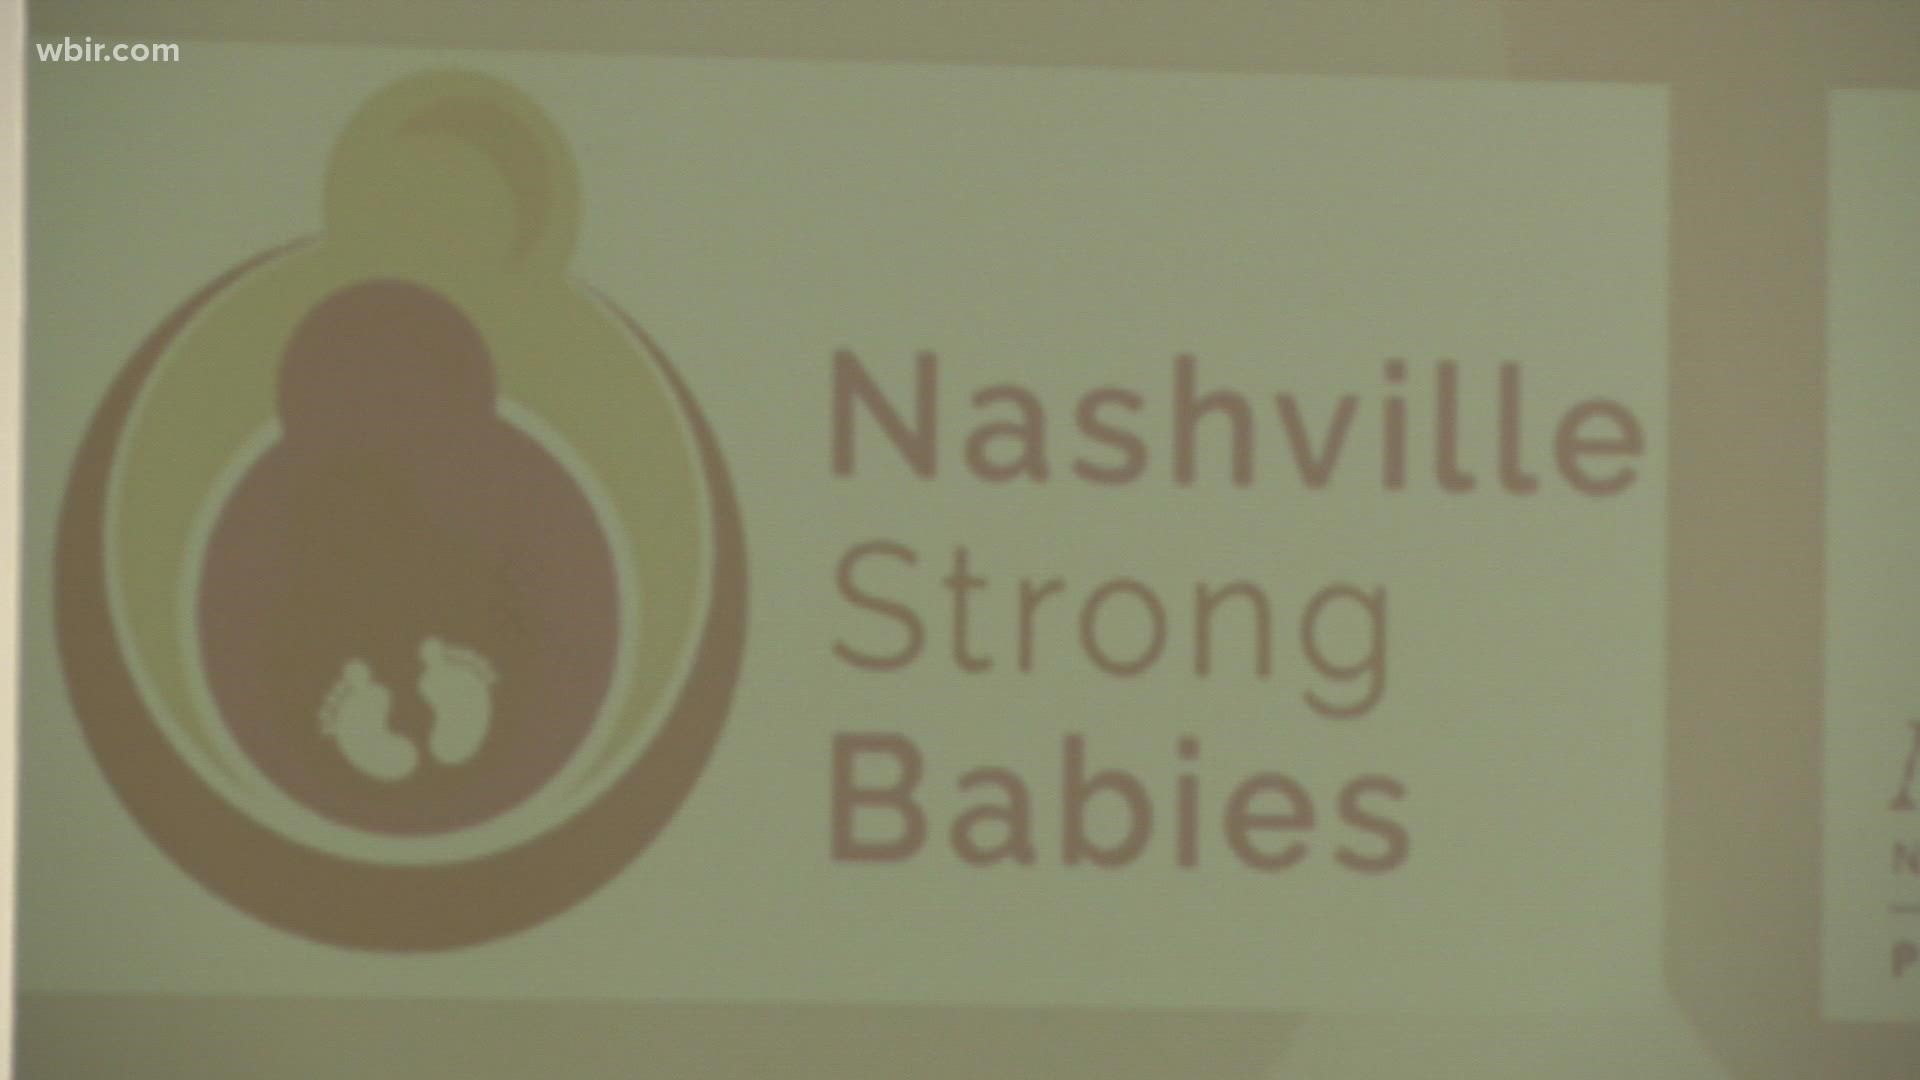 $125,000 will go to a program that focuses on helping every Nashville baby celebrate their 1st birthday.